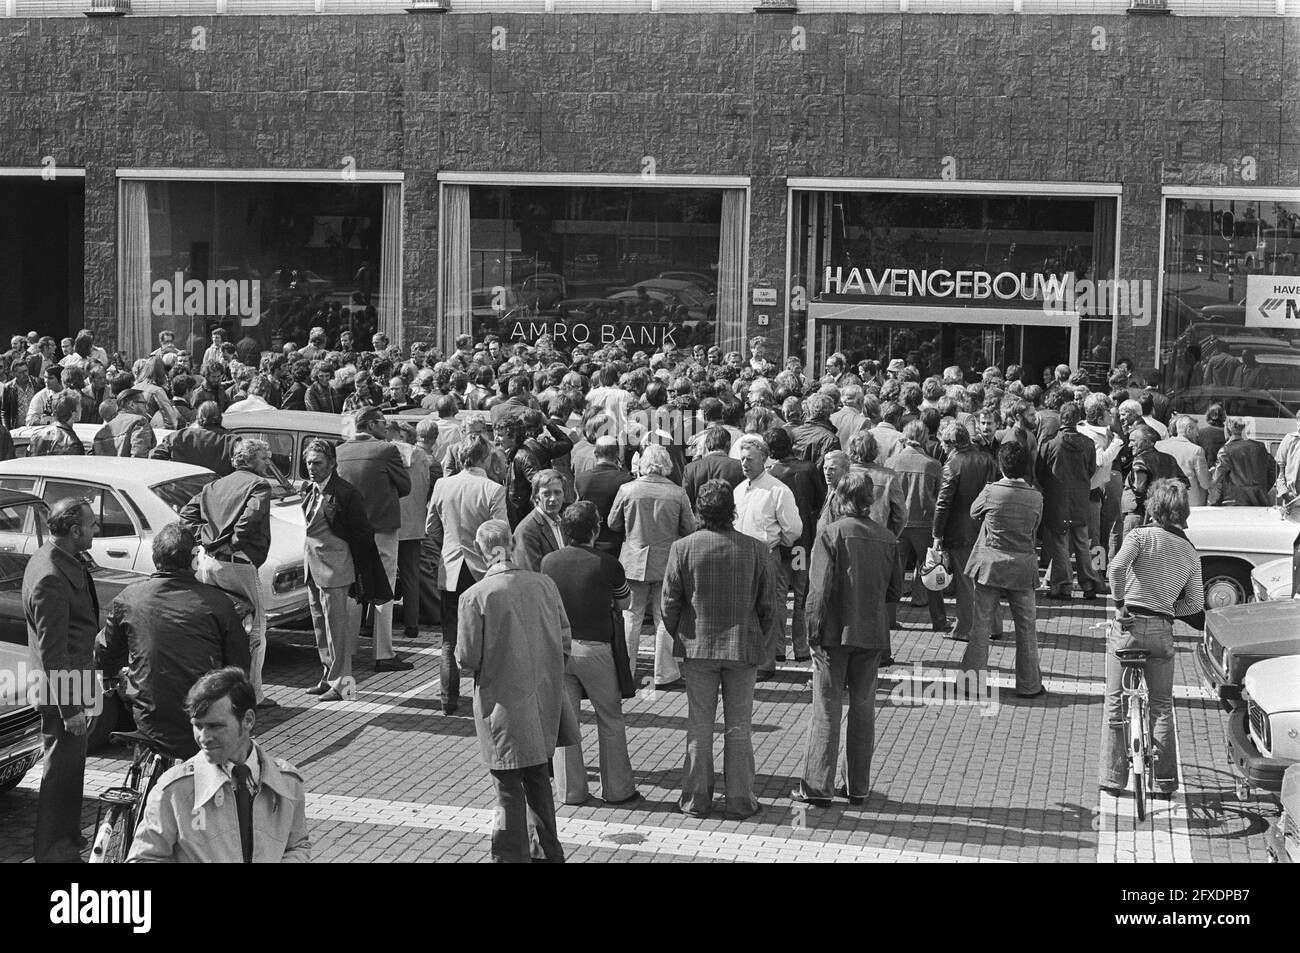 Strike Amsterdam port workers, dockers in front of port building port area, September 2, 1976, PORT WORKERS, Strikes, The Netherlands, 20th century press agency photo, news to remember, documentary, historic photography 1945-1990, visual stories, human history of the Twentieth Century, capturing moments in time Stock Photo